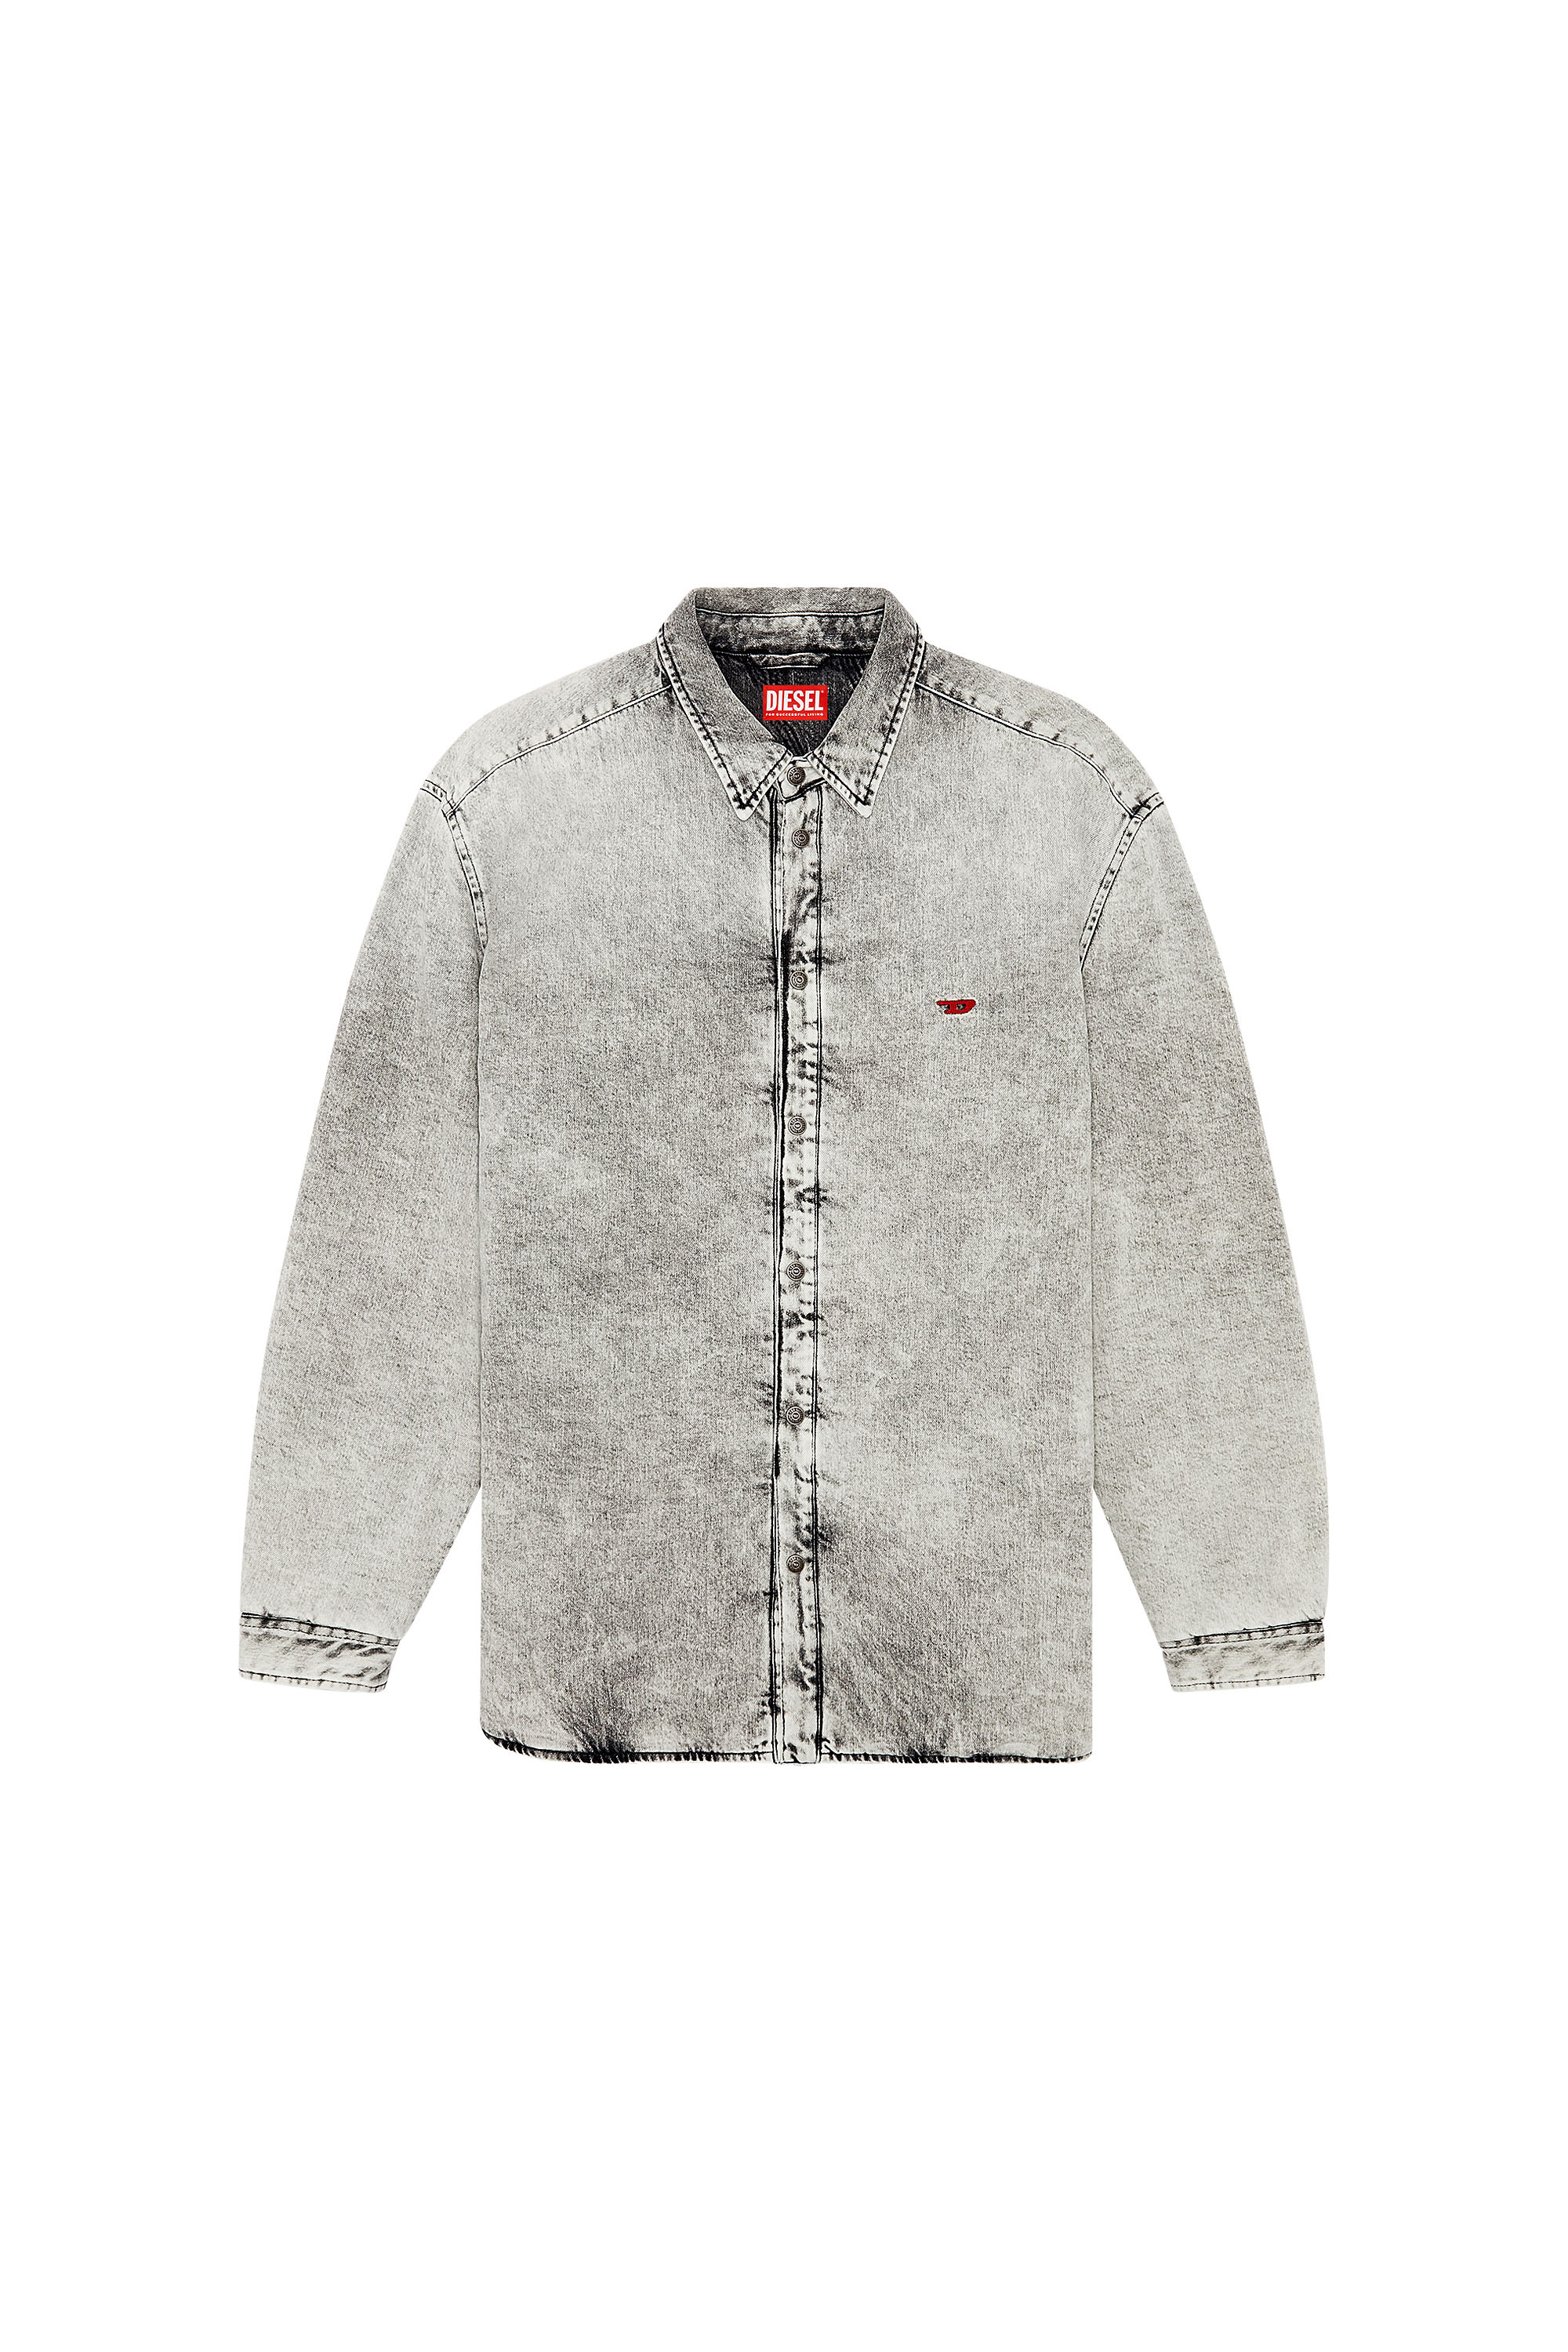 Diesel - D-FLAIM-S, Homme Padded overshirt in tailored denim in Gris - Image 6